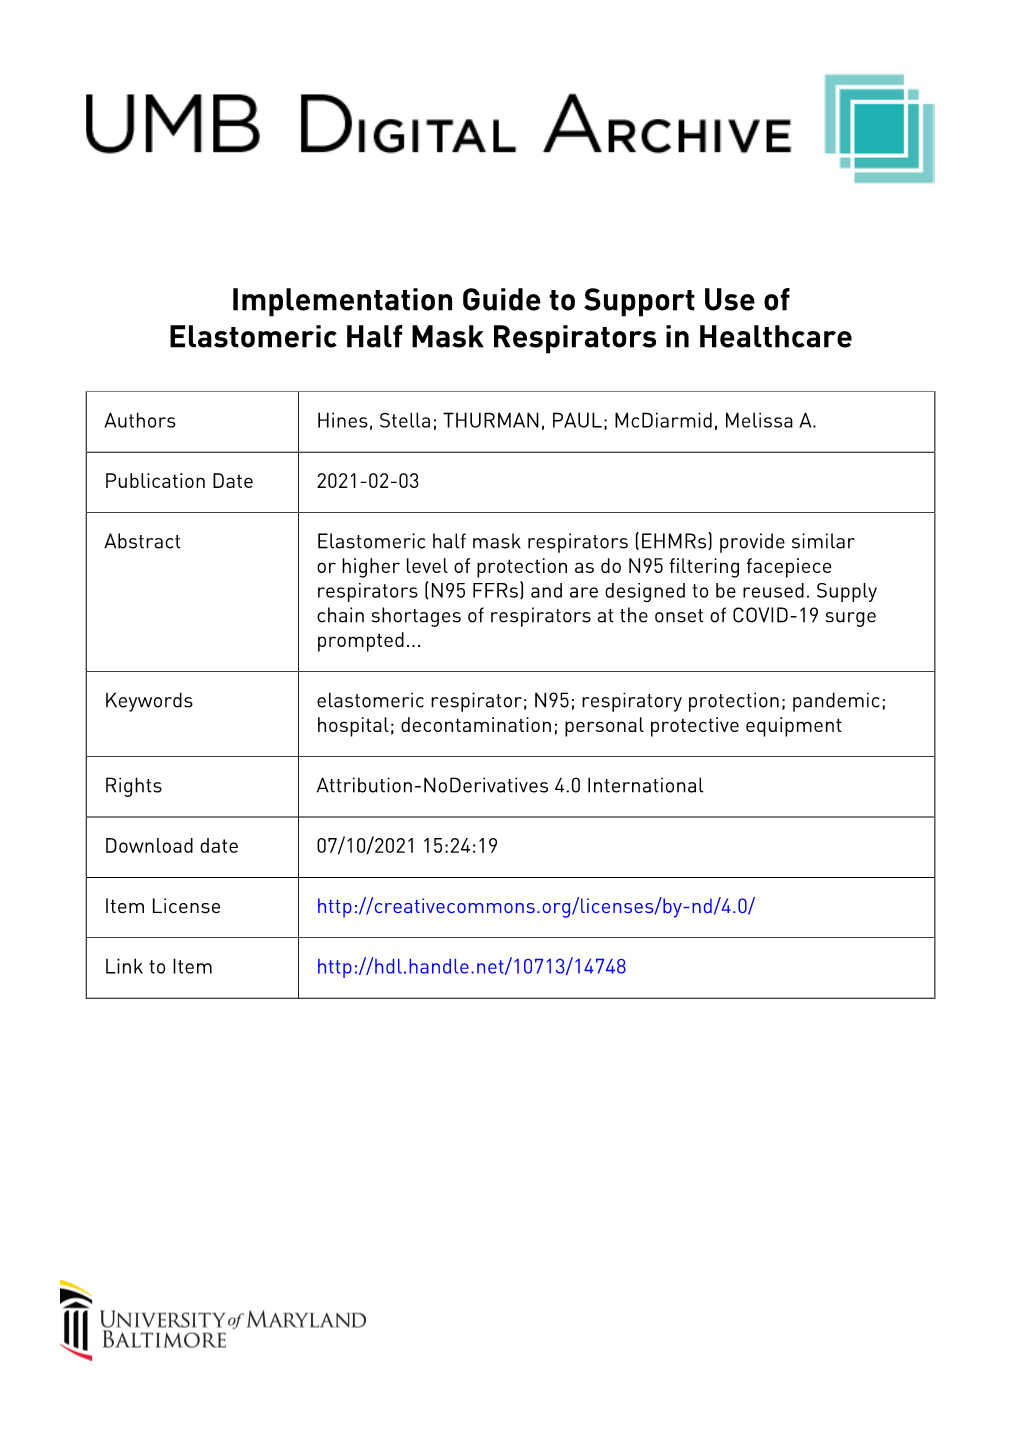 Implementation Guide to Support Use of Elastomeric Half Mask Respirators in Healthcare